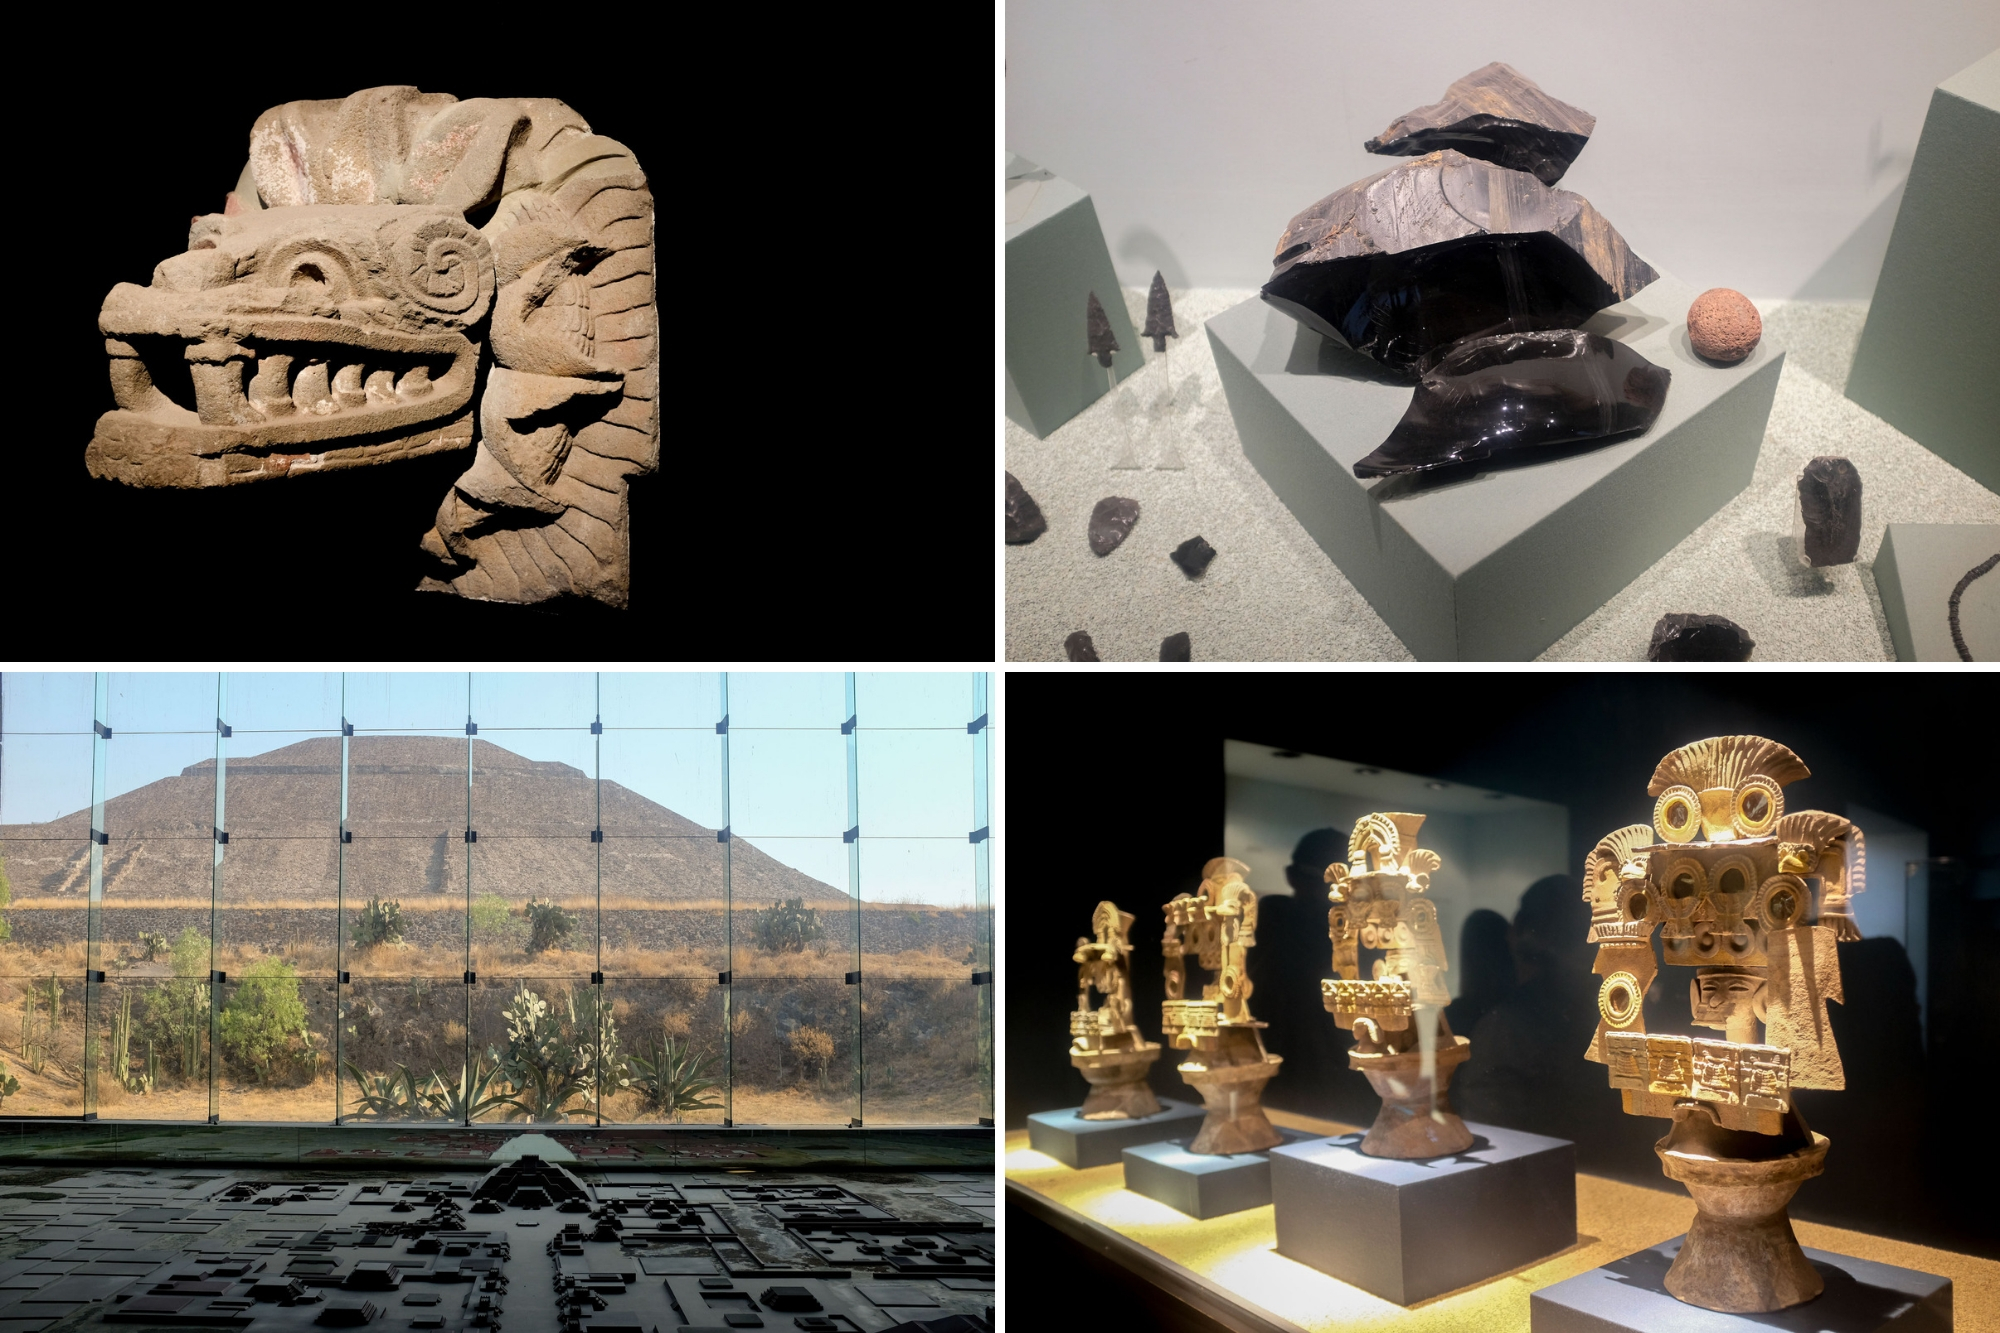 Collage of artifacts at the museum and a model of the pyramids